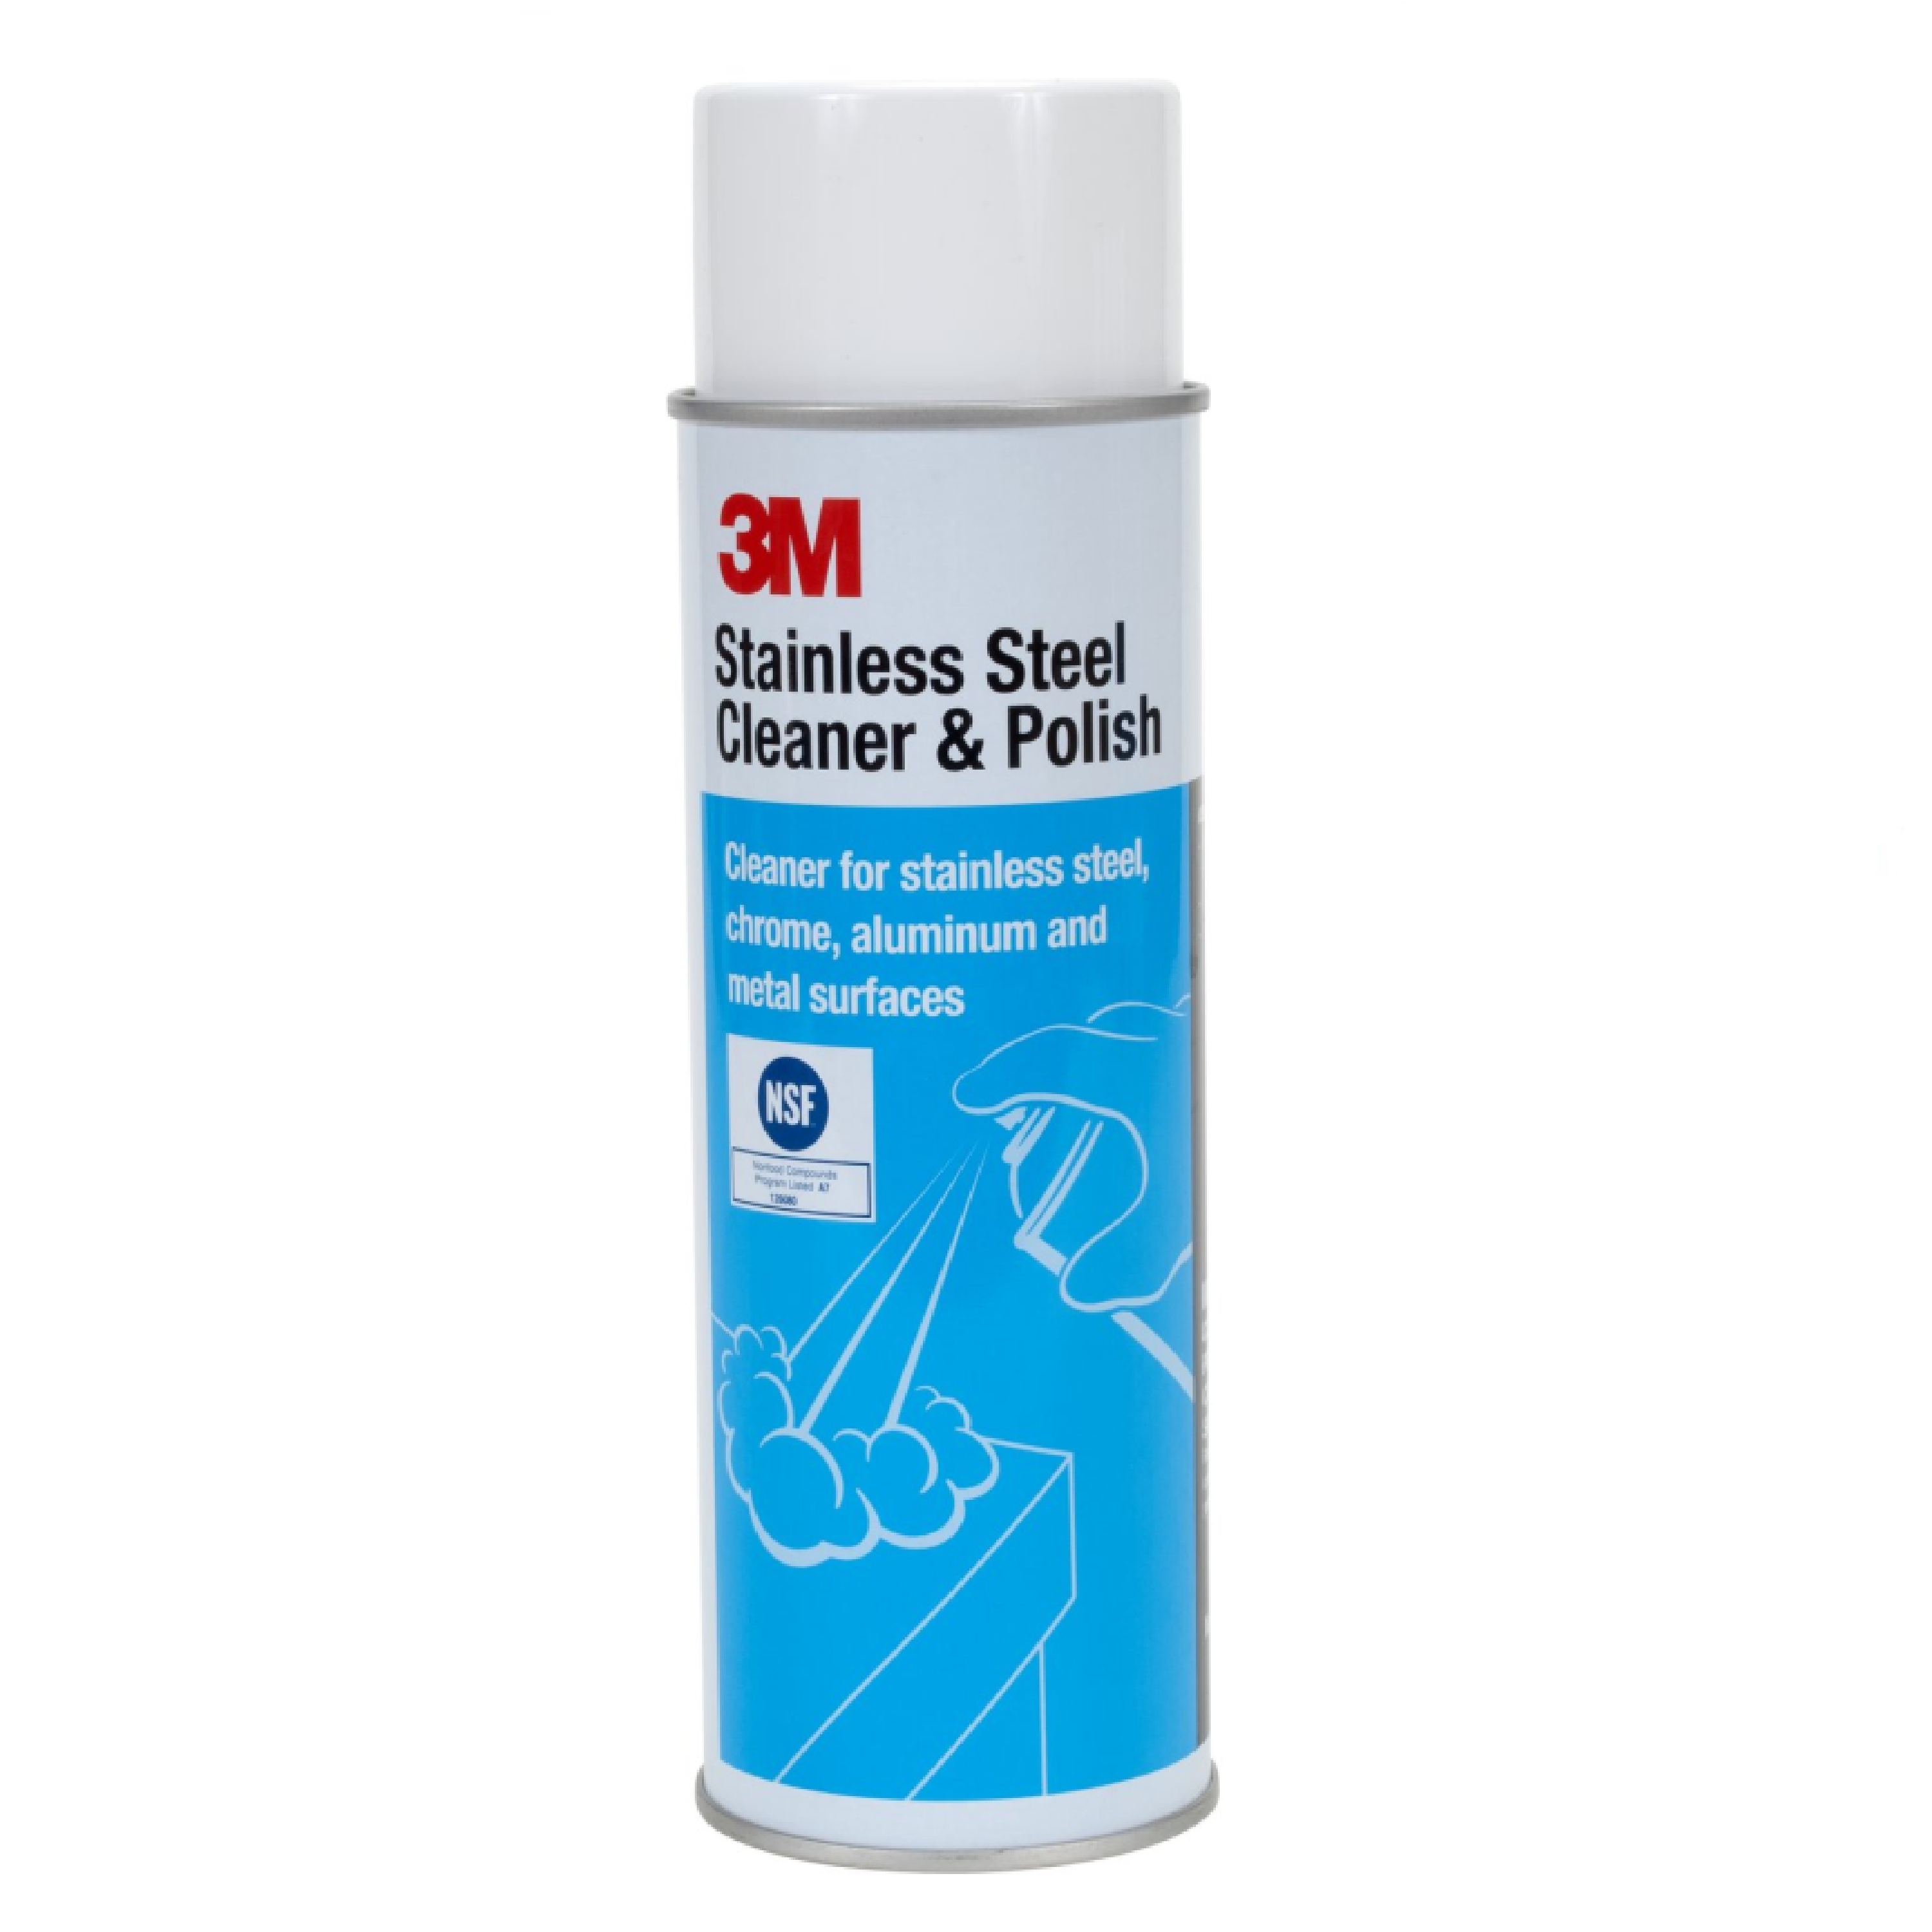 3M 14002 Stainless Steel CLEANER And POLISH 21 OZ 600g